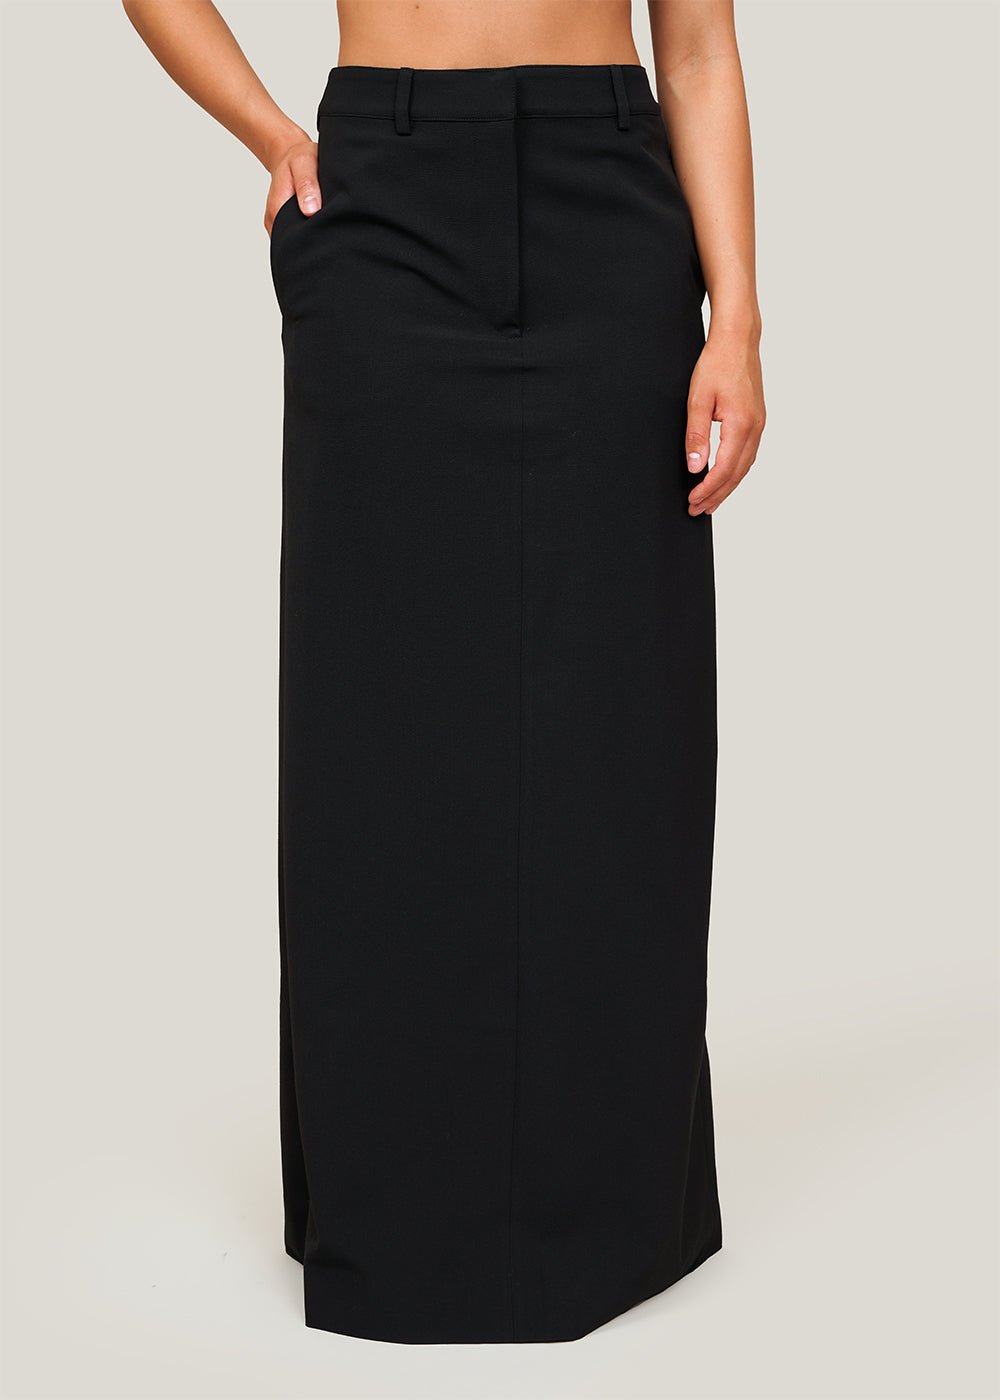 Minter Maxi Skirt in Black by BEAUFILLE – New Classics Studios